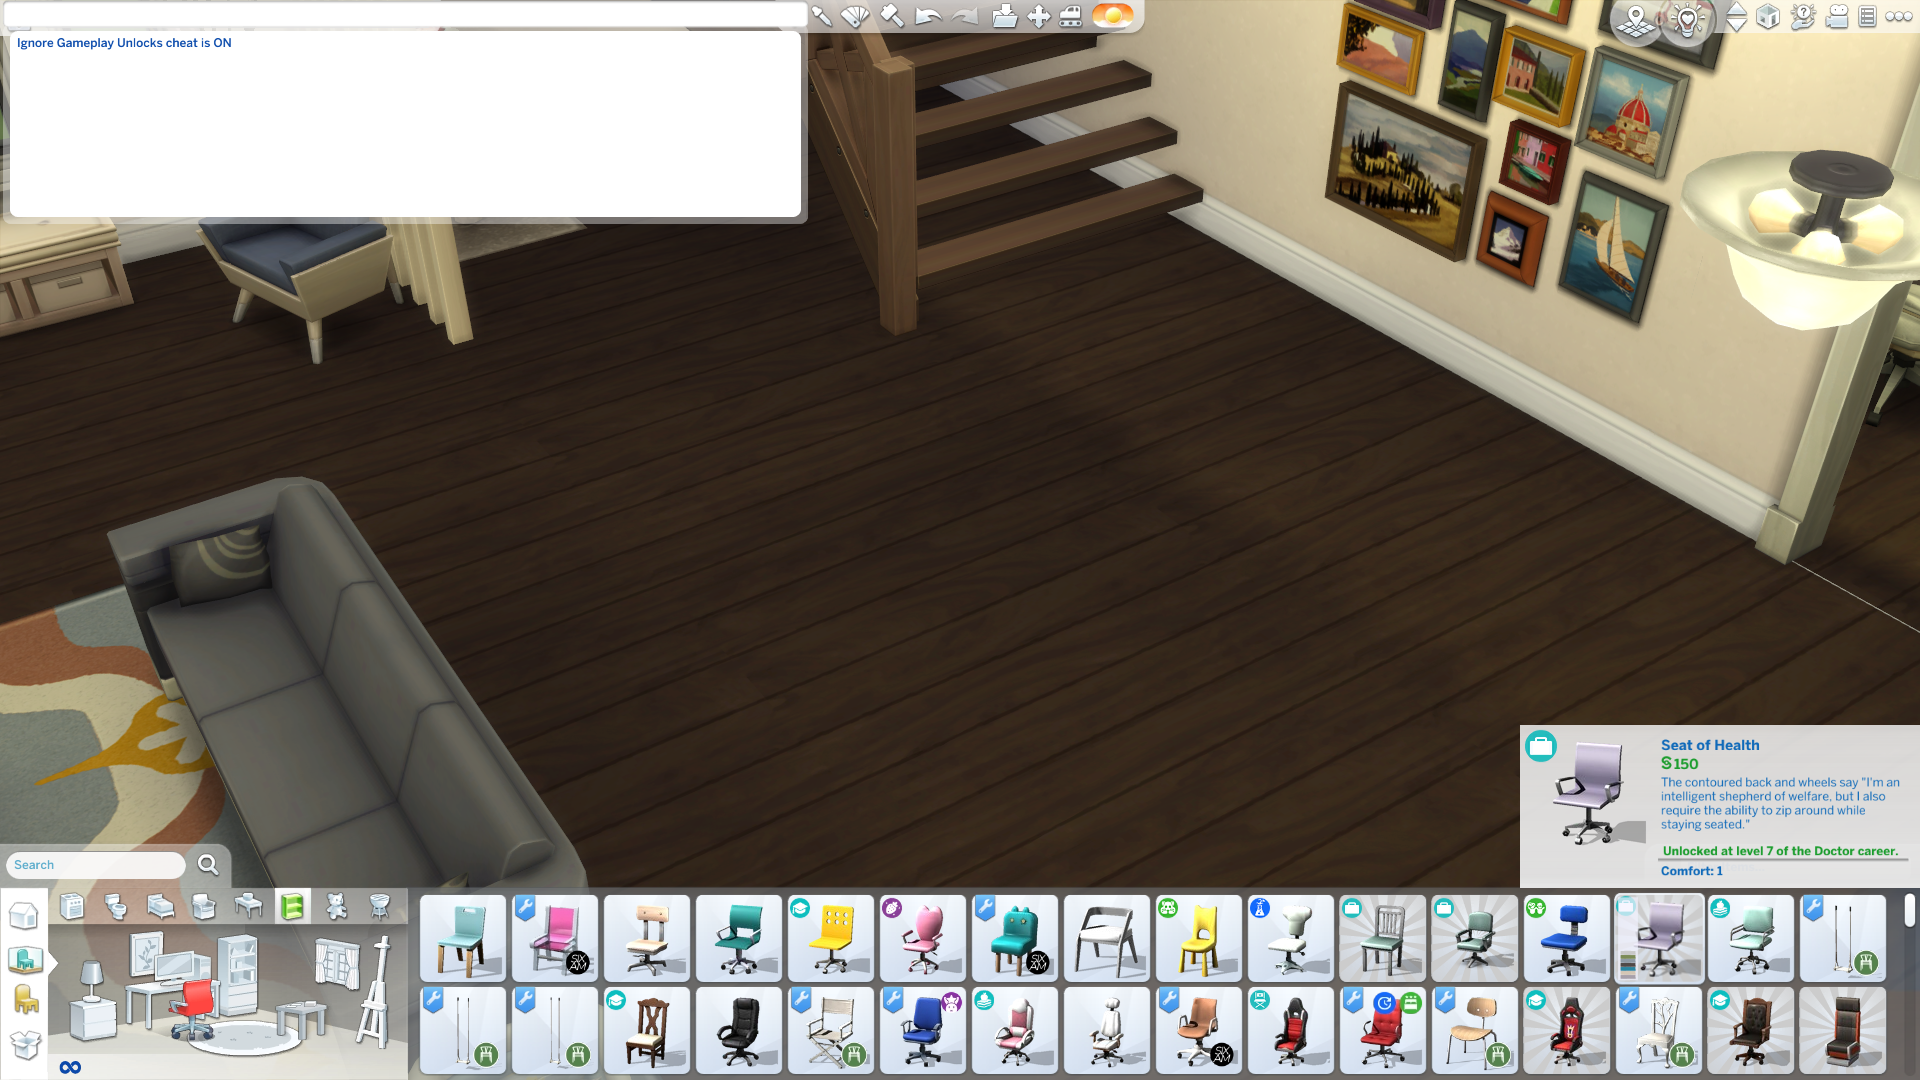 The Sims 4 Furniture screen showing unlocked furniture